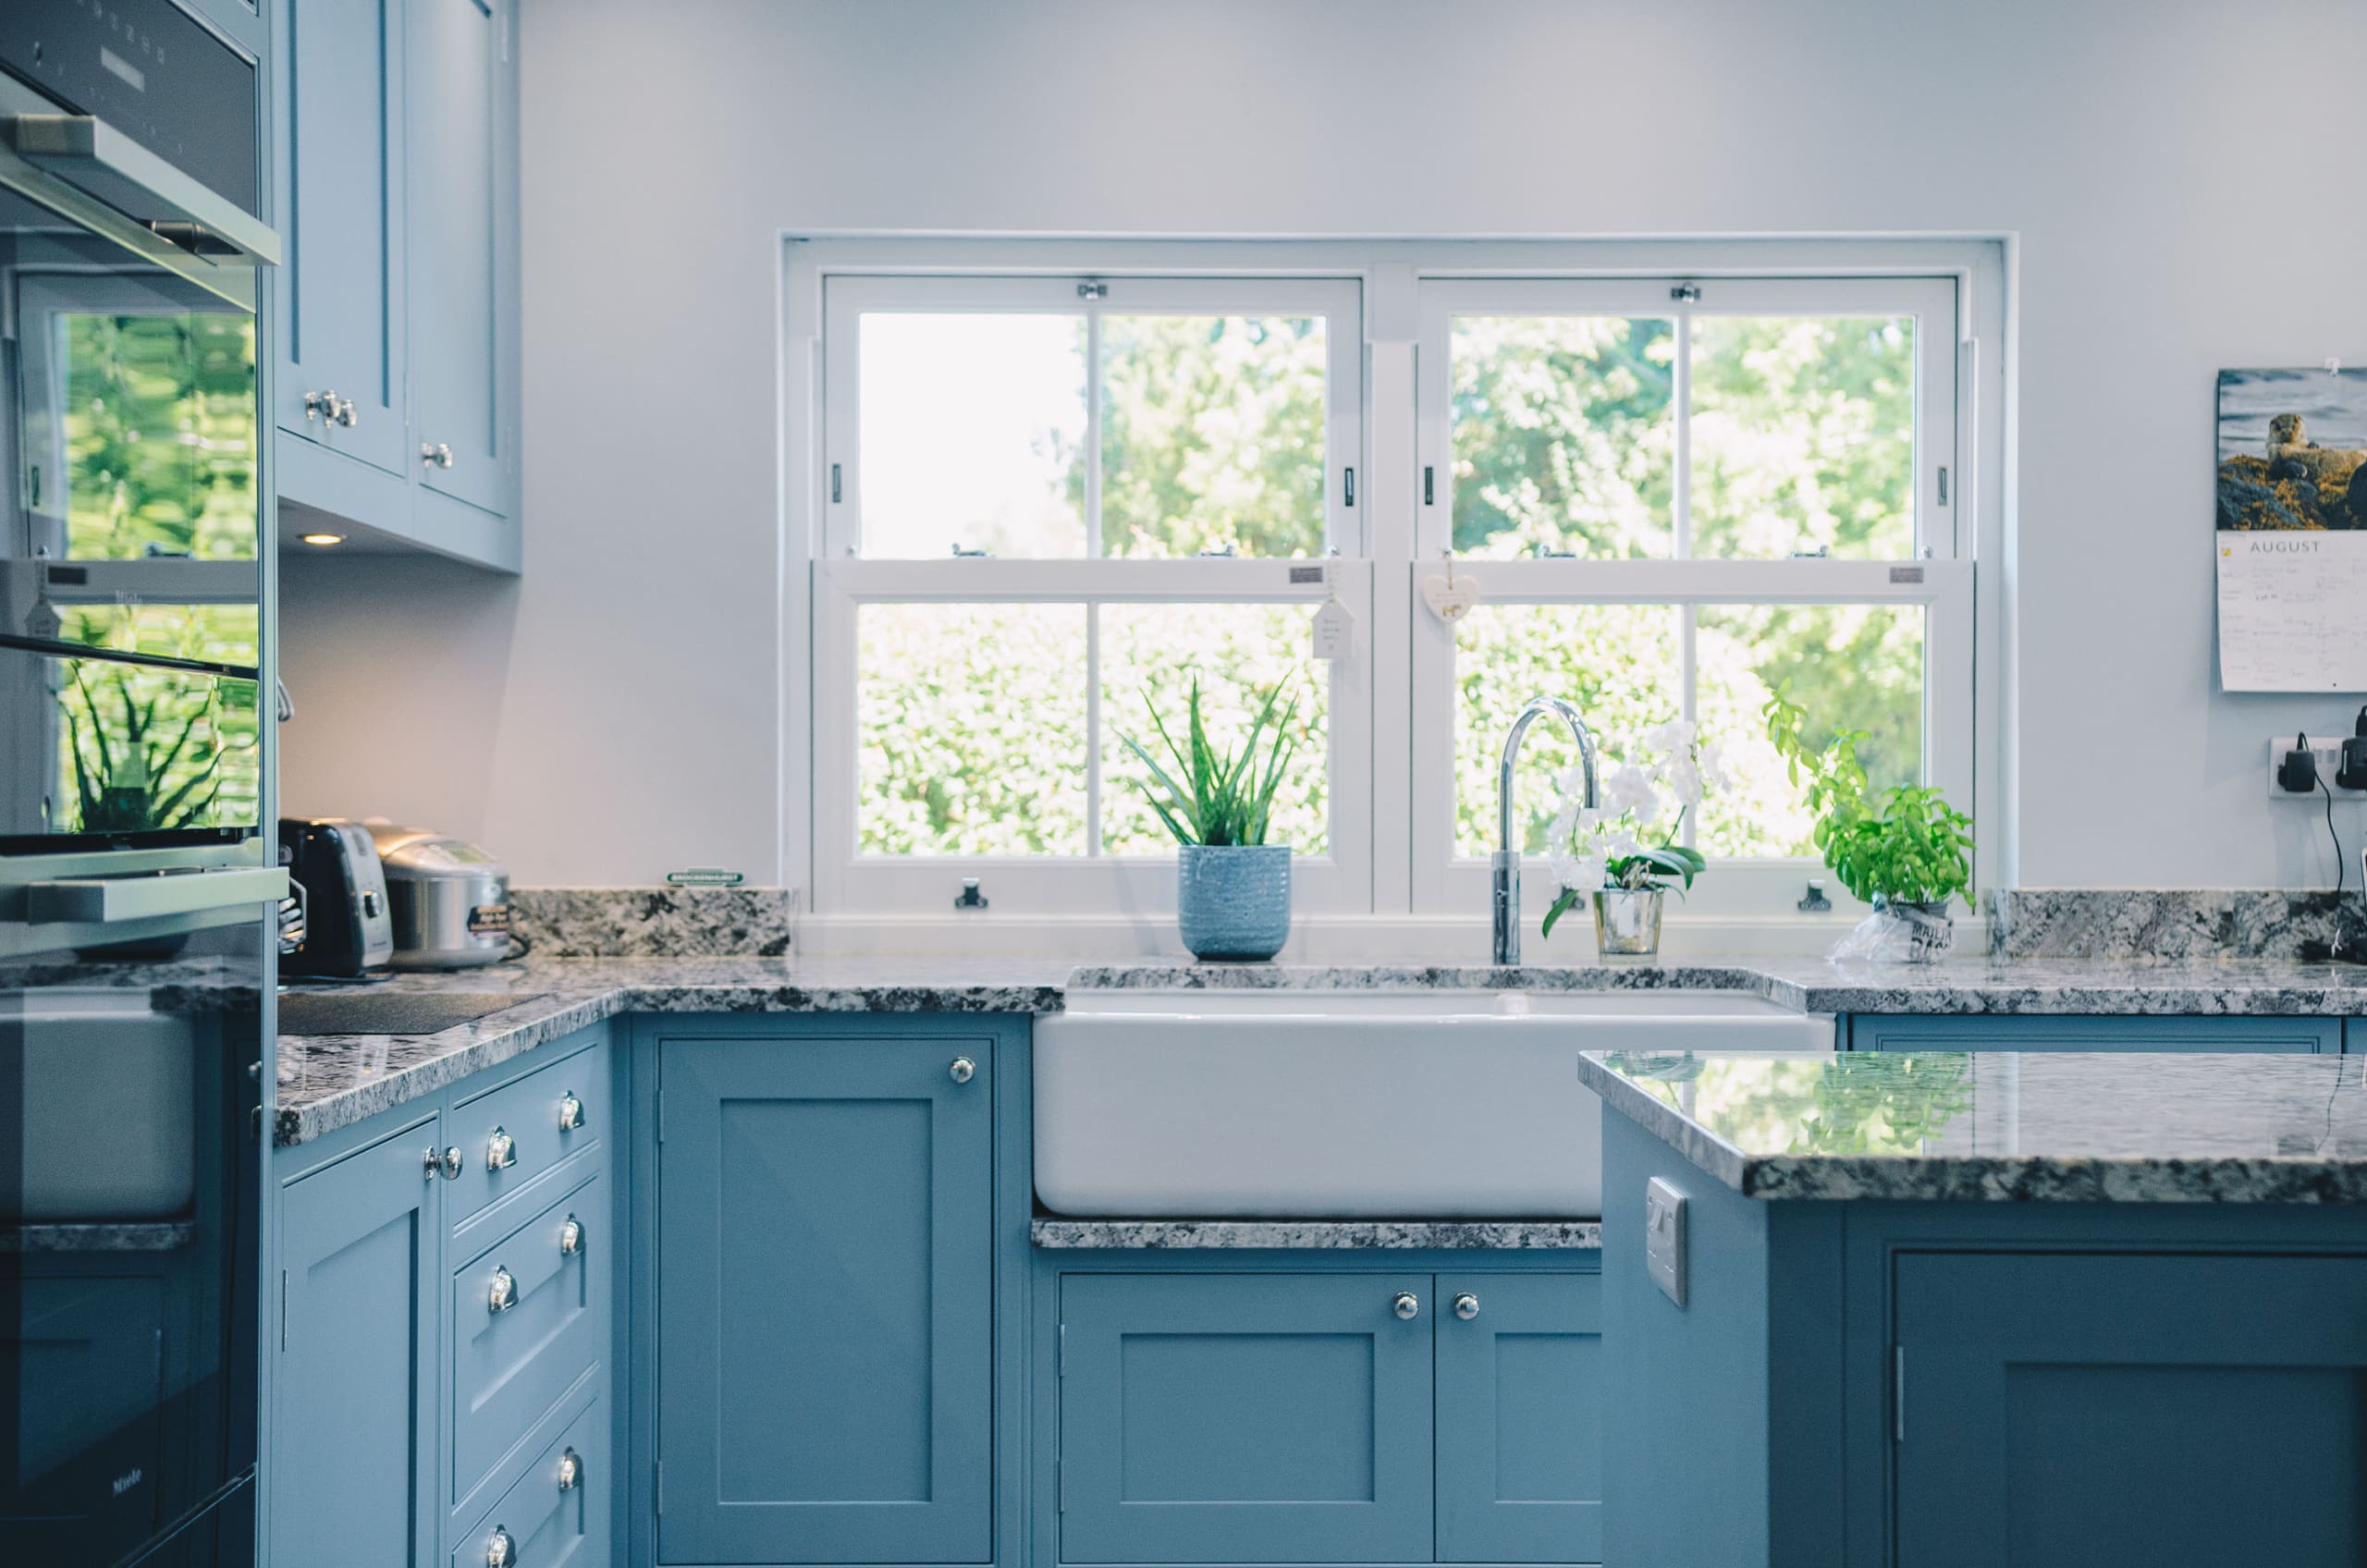 Interior kitchen with blue cupboard fronts and sash window by Master frame.